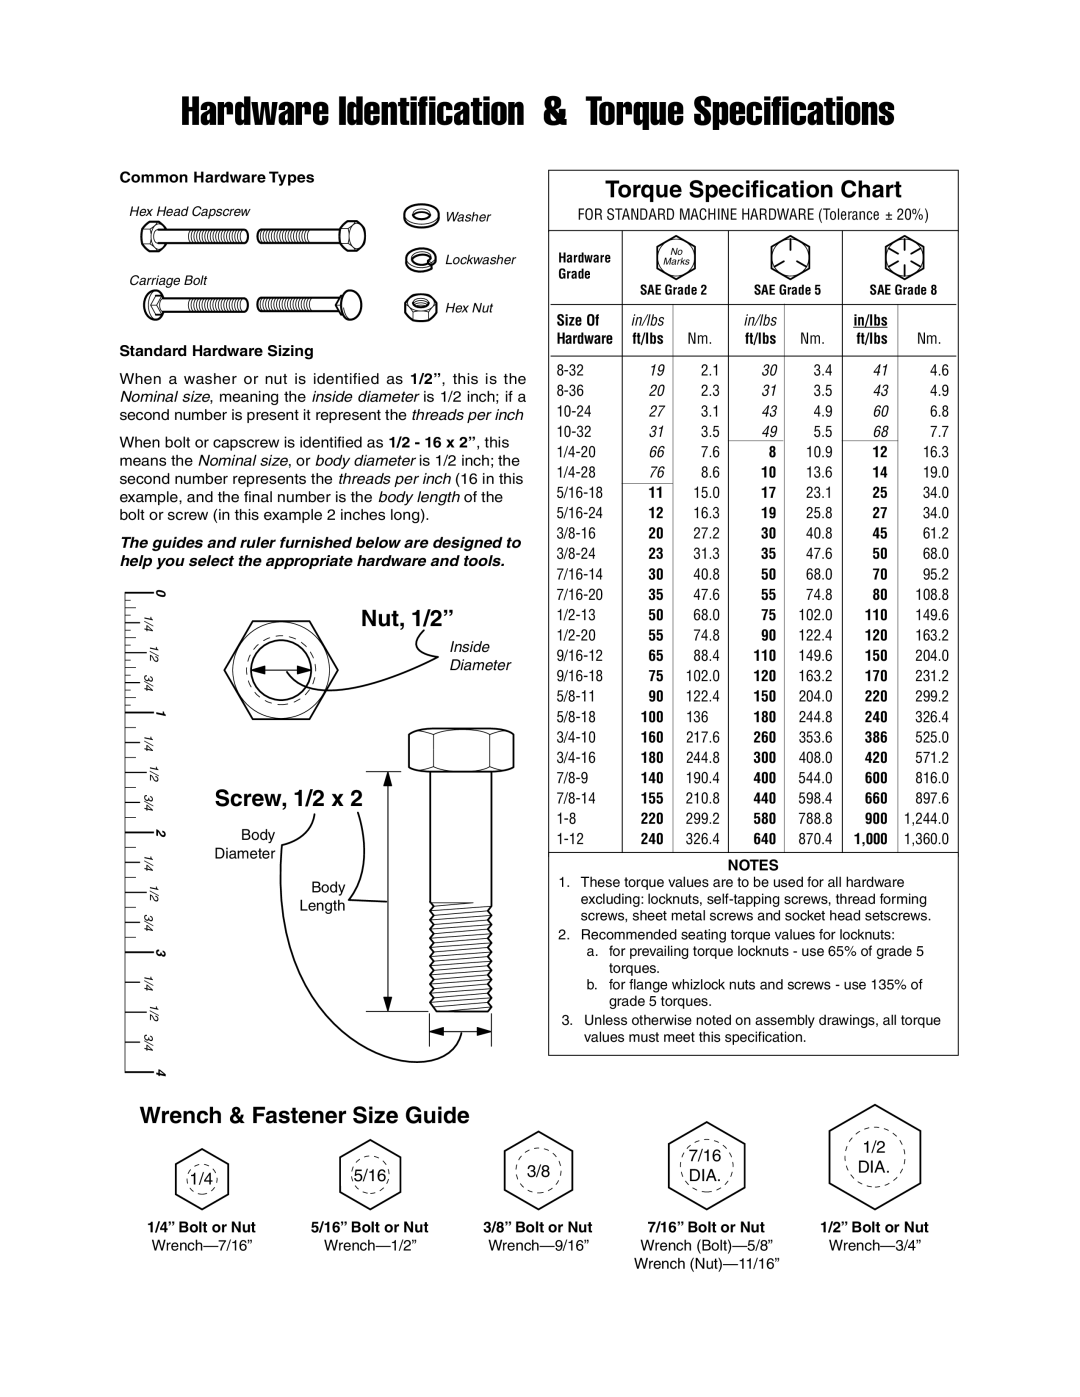 Simplicity 1694332 Wrench & Fastener Size Guide, Common Hardware Types, Standard Hardware Sizing, 1/4” Bolt or Nut, 7/16 